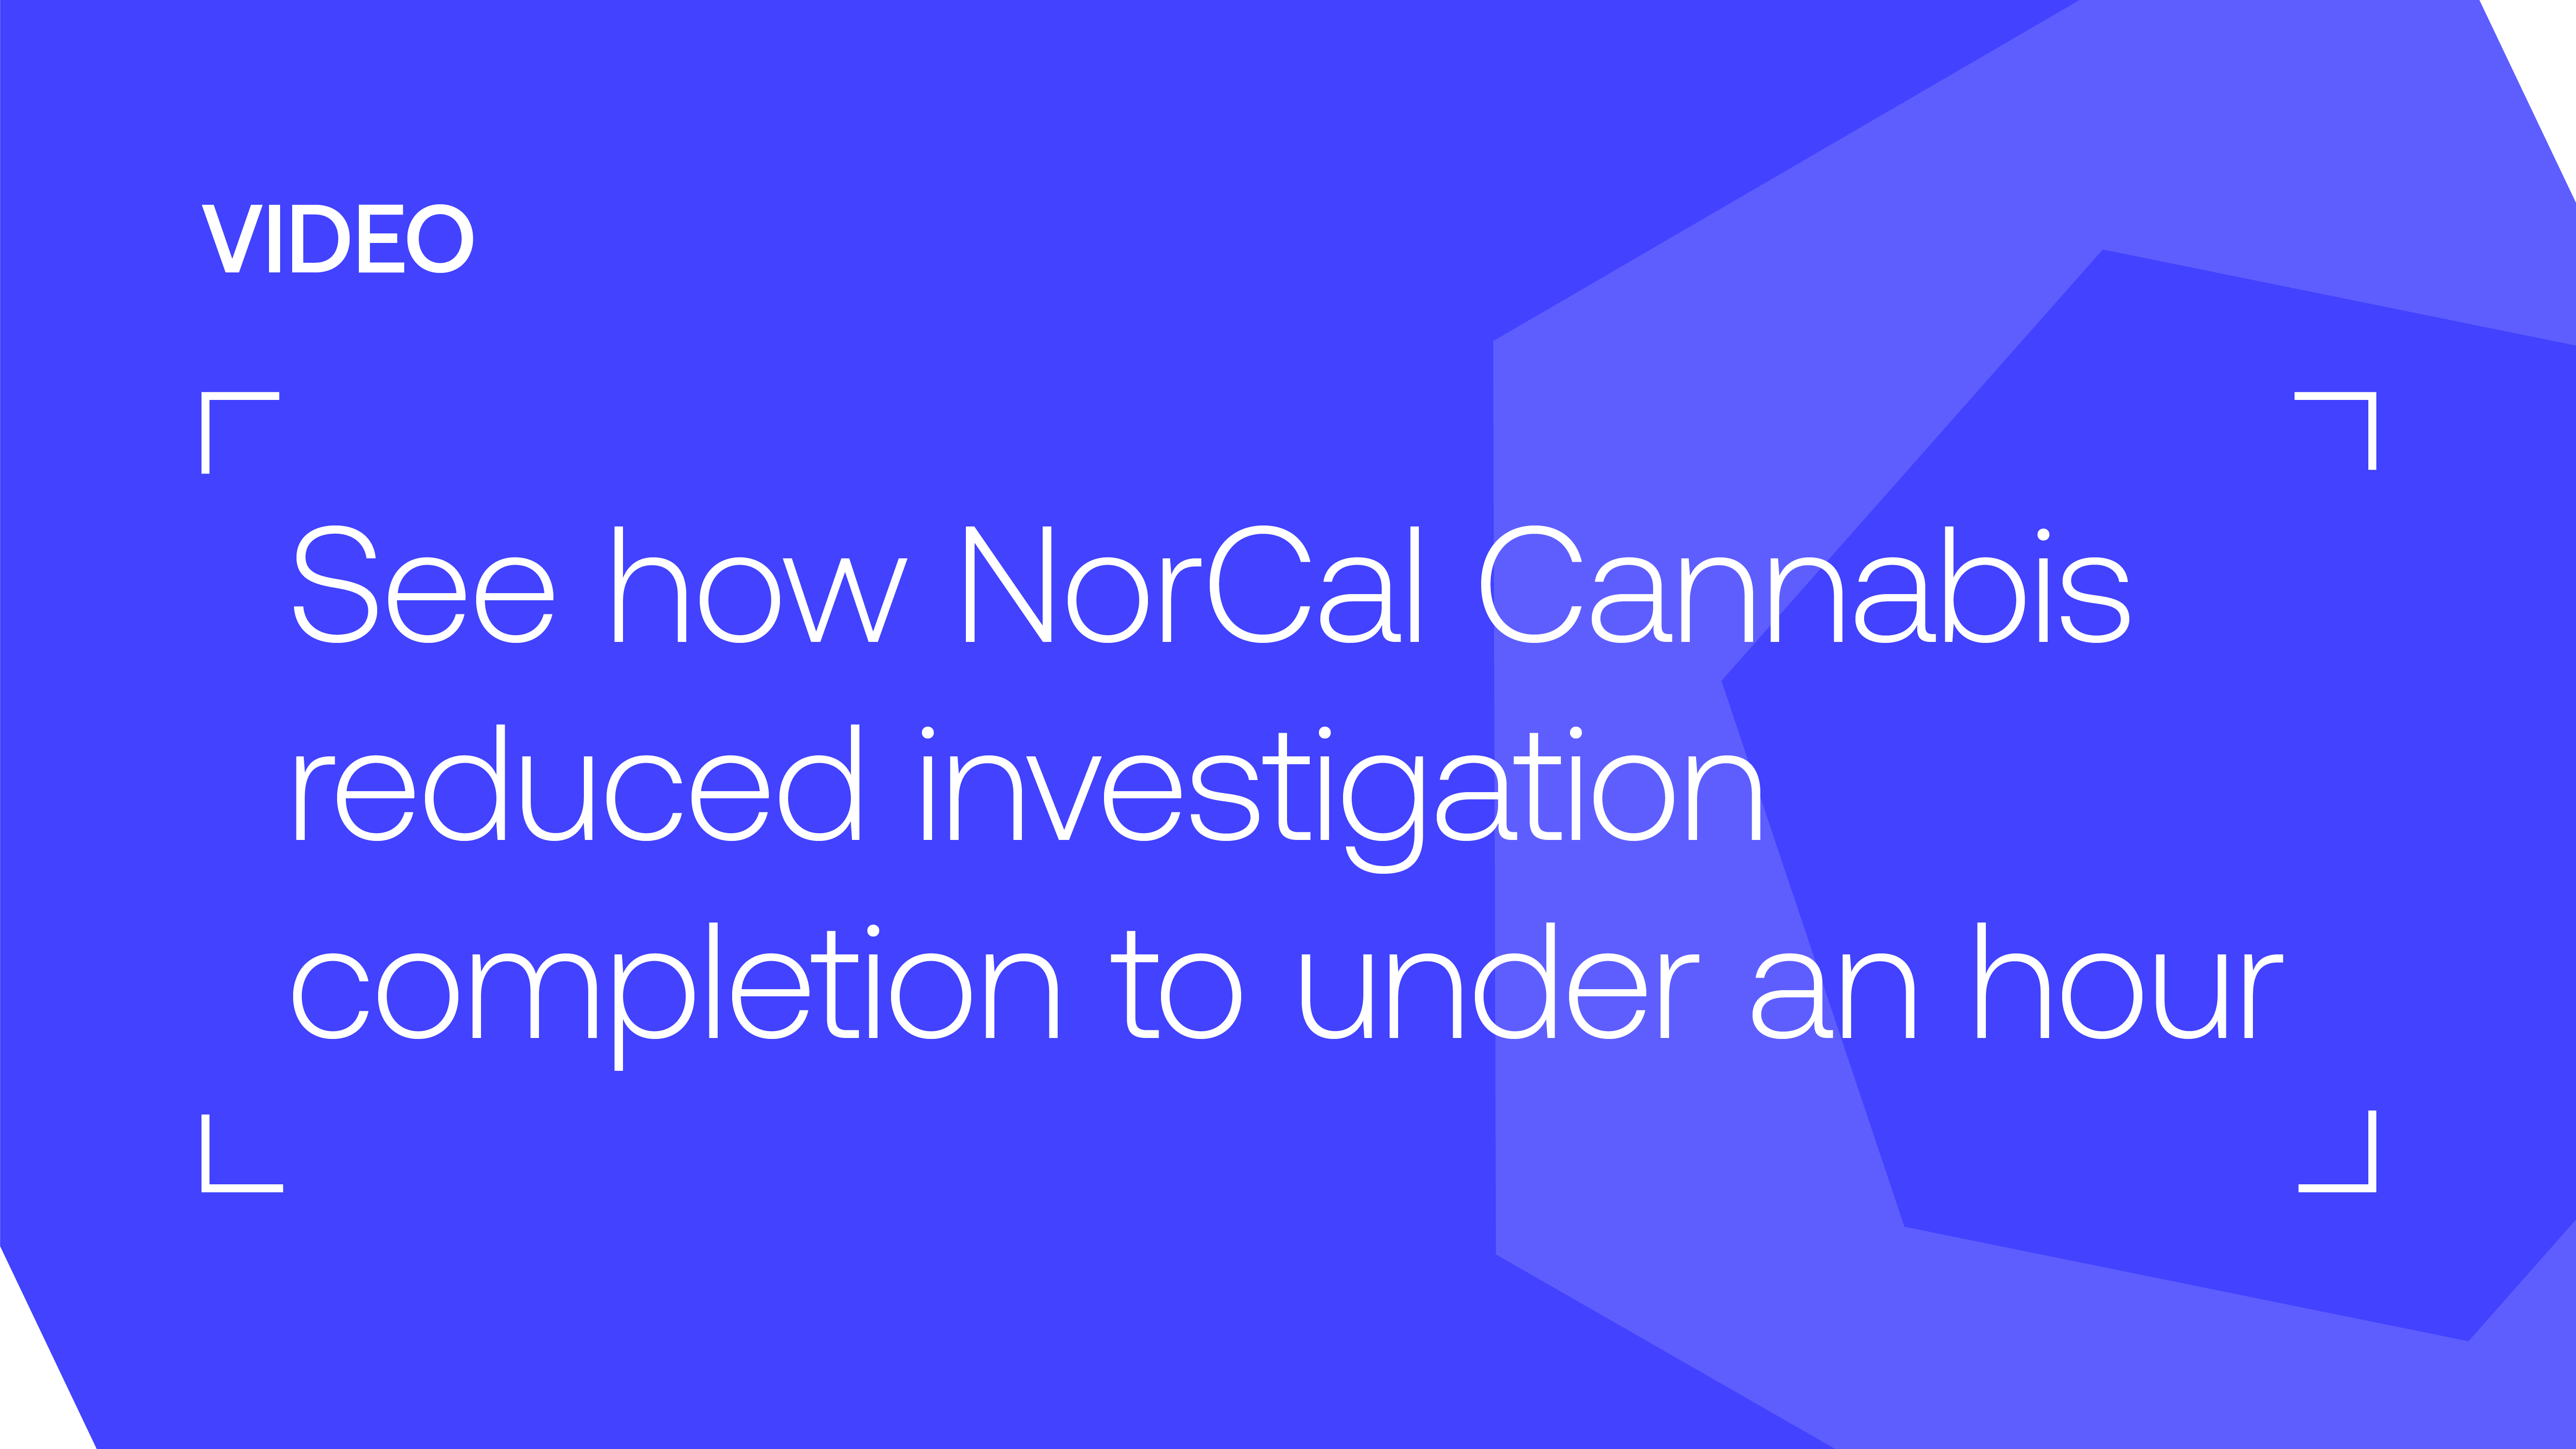 NorCal Cannabis speeds up forensic investigation times with Ambient.ai